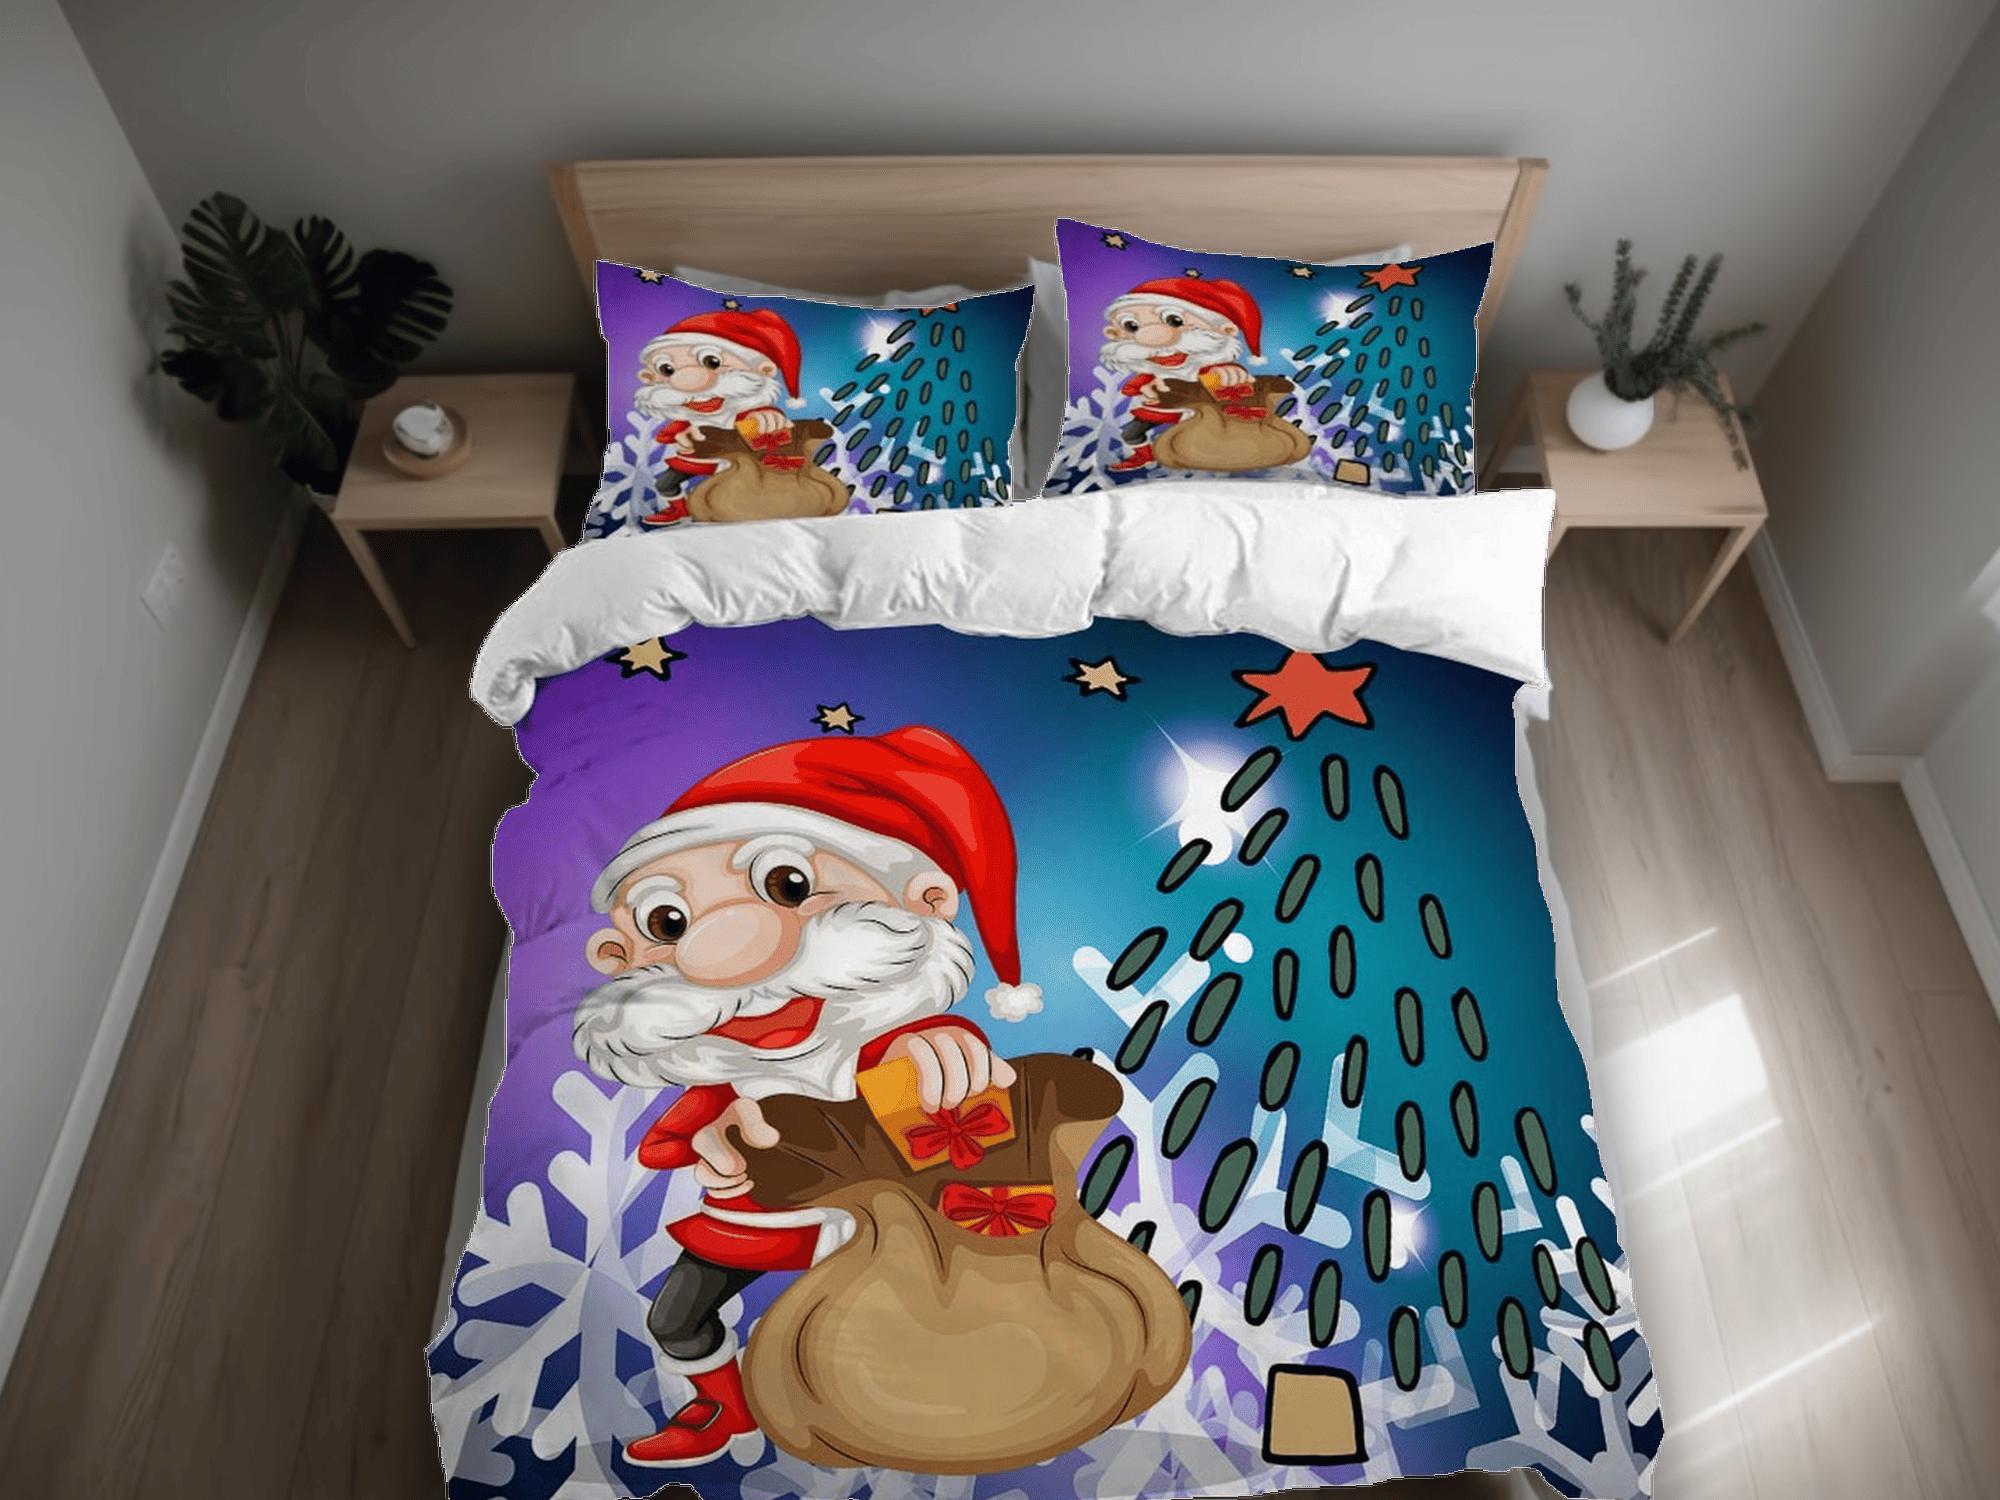 daintyduvet Cute Santa Claus Christmas bedding & pillowcase holiday gift for kids, duvet cover king queen full twin toddler bedding baby Christmas